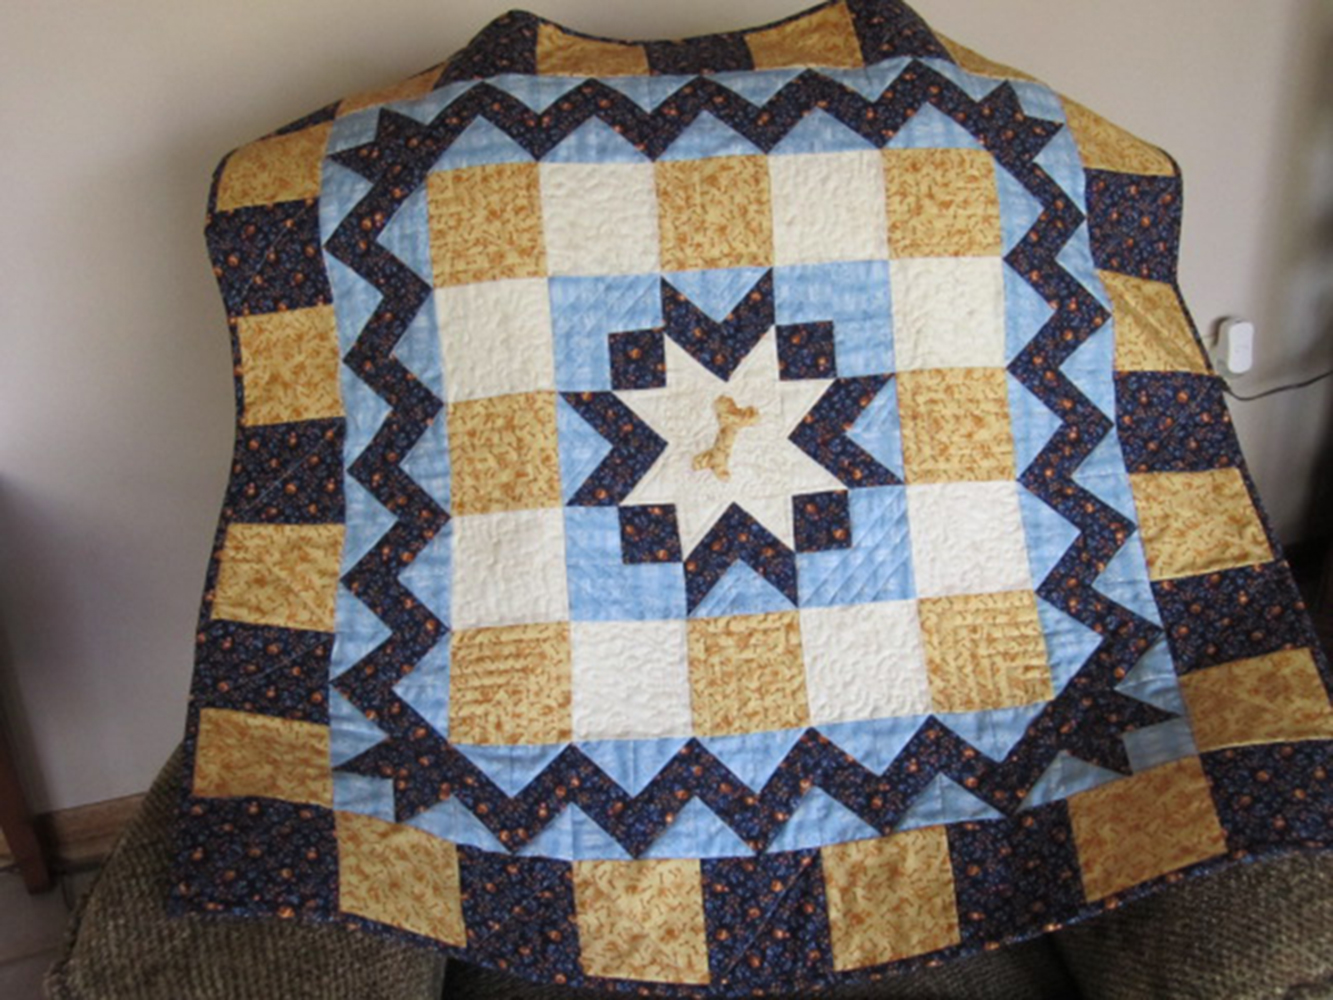 NVBC Quilt made and donated by Joann Anders